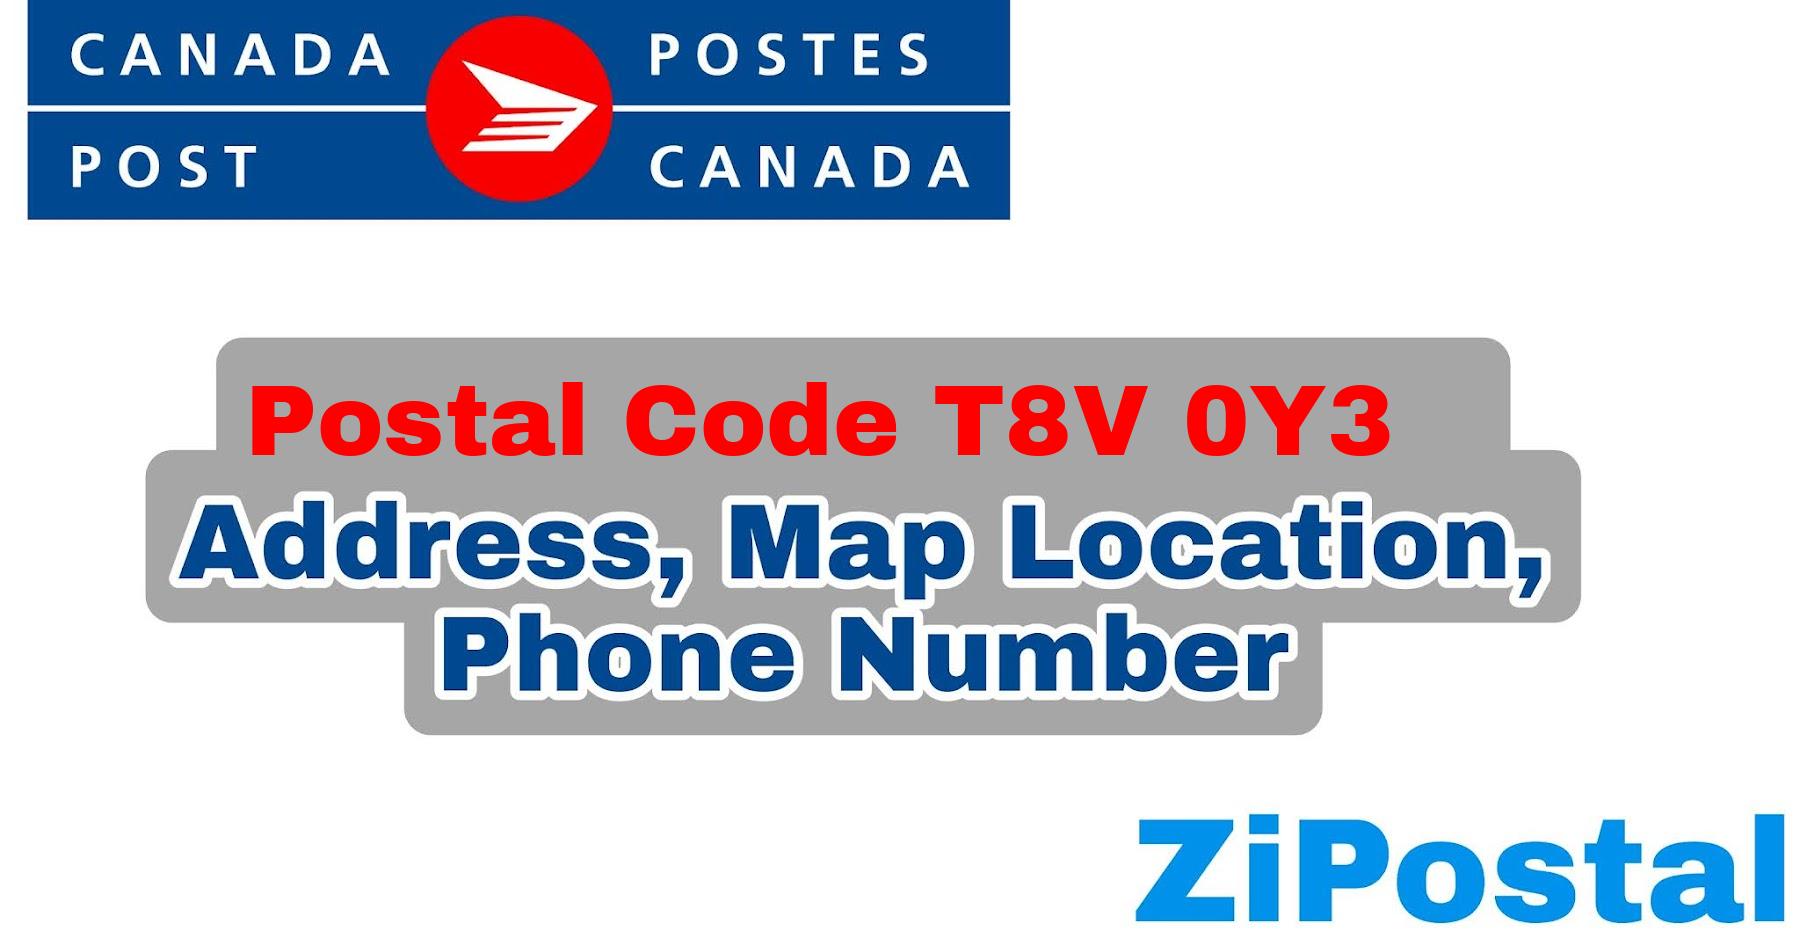 Postal Code T8V 0Y3 Address Map Location and Phone Number